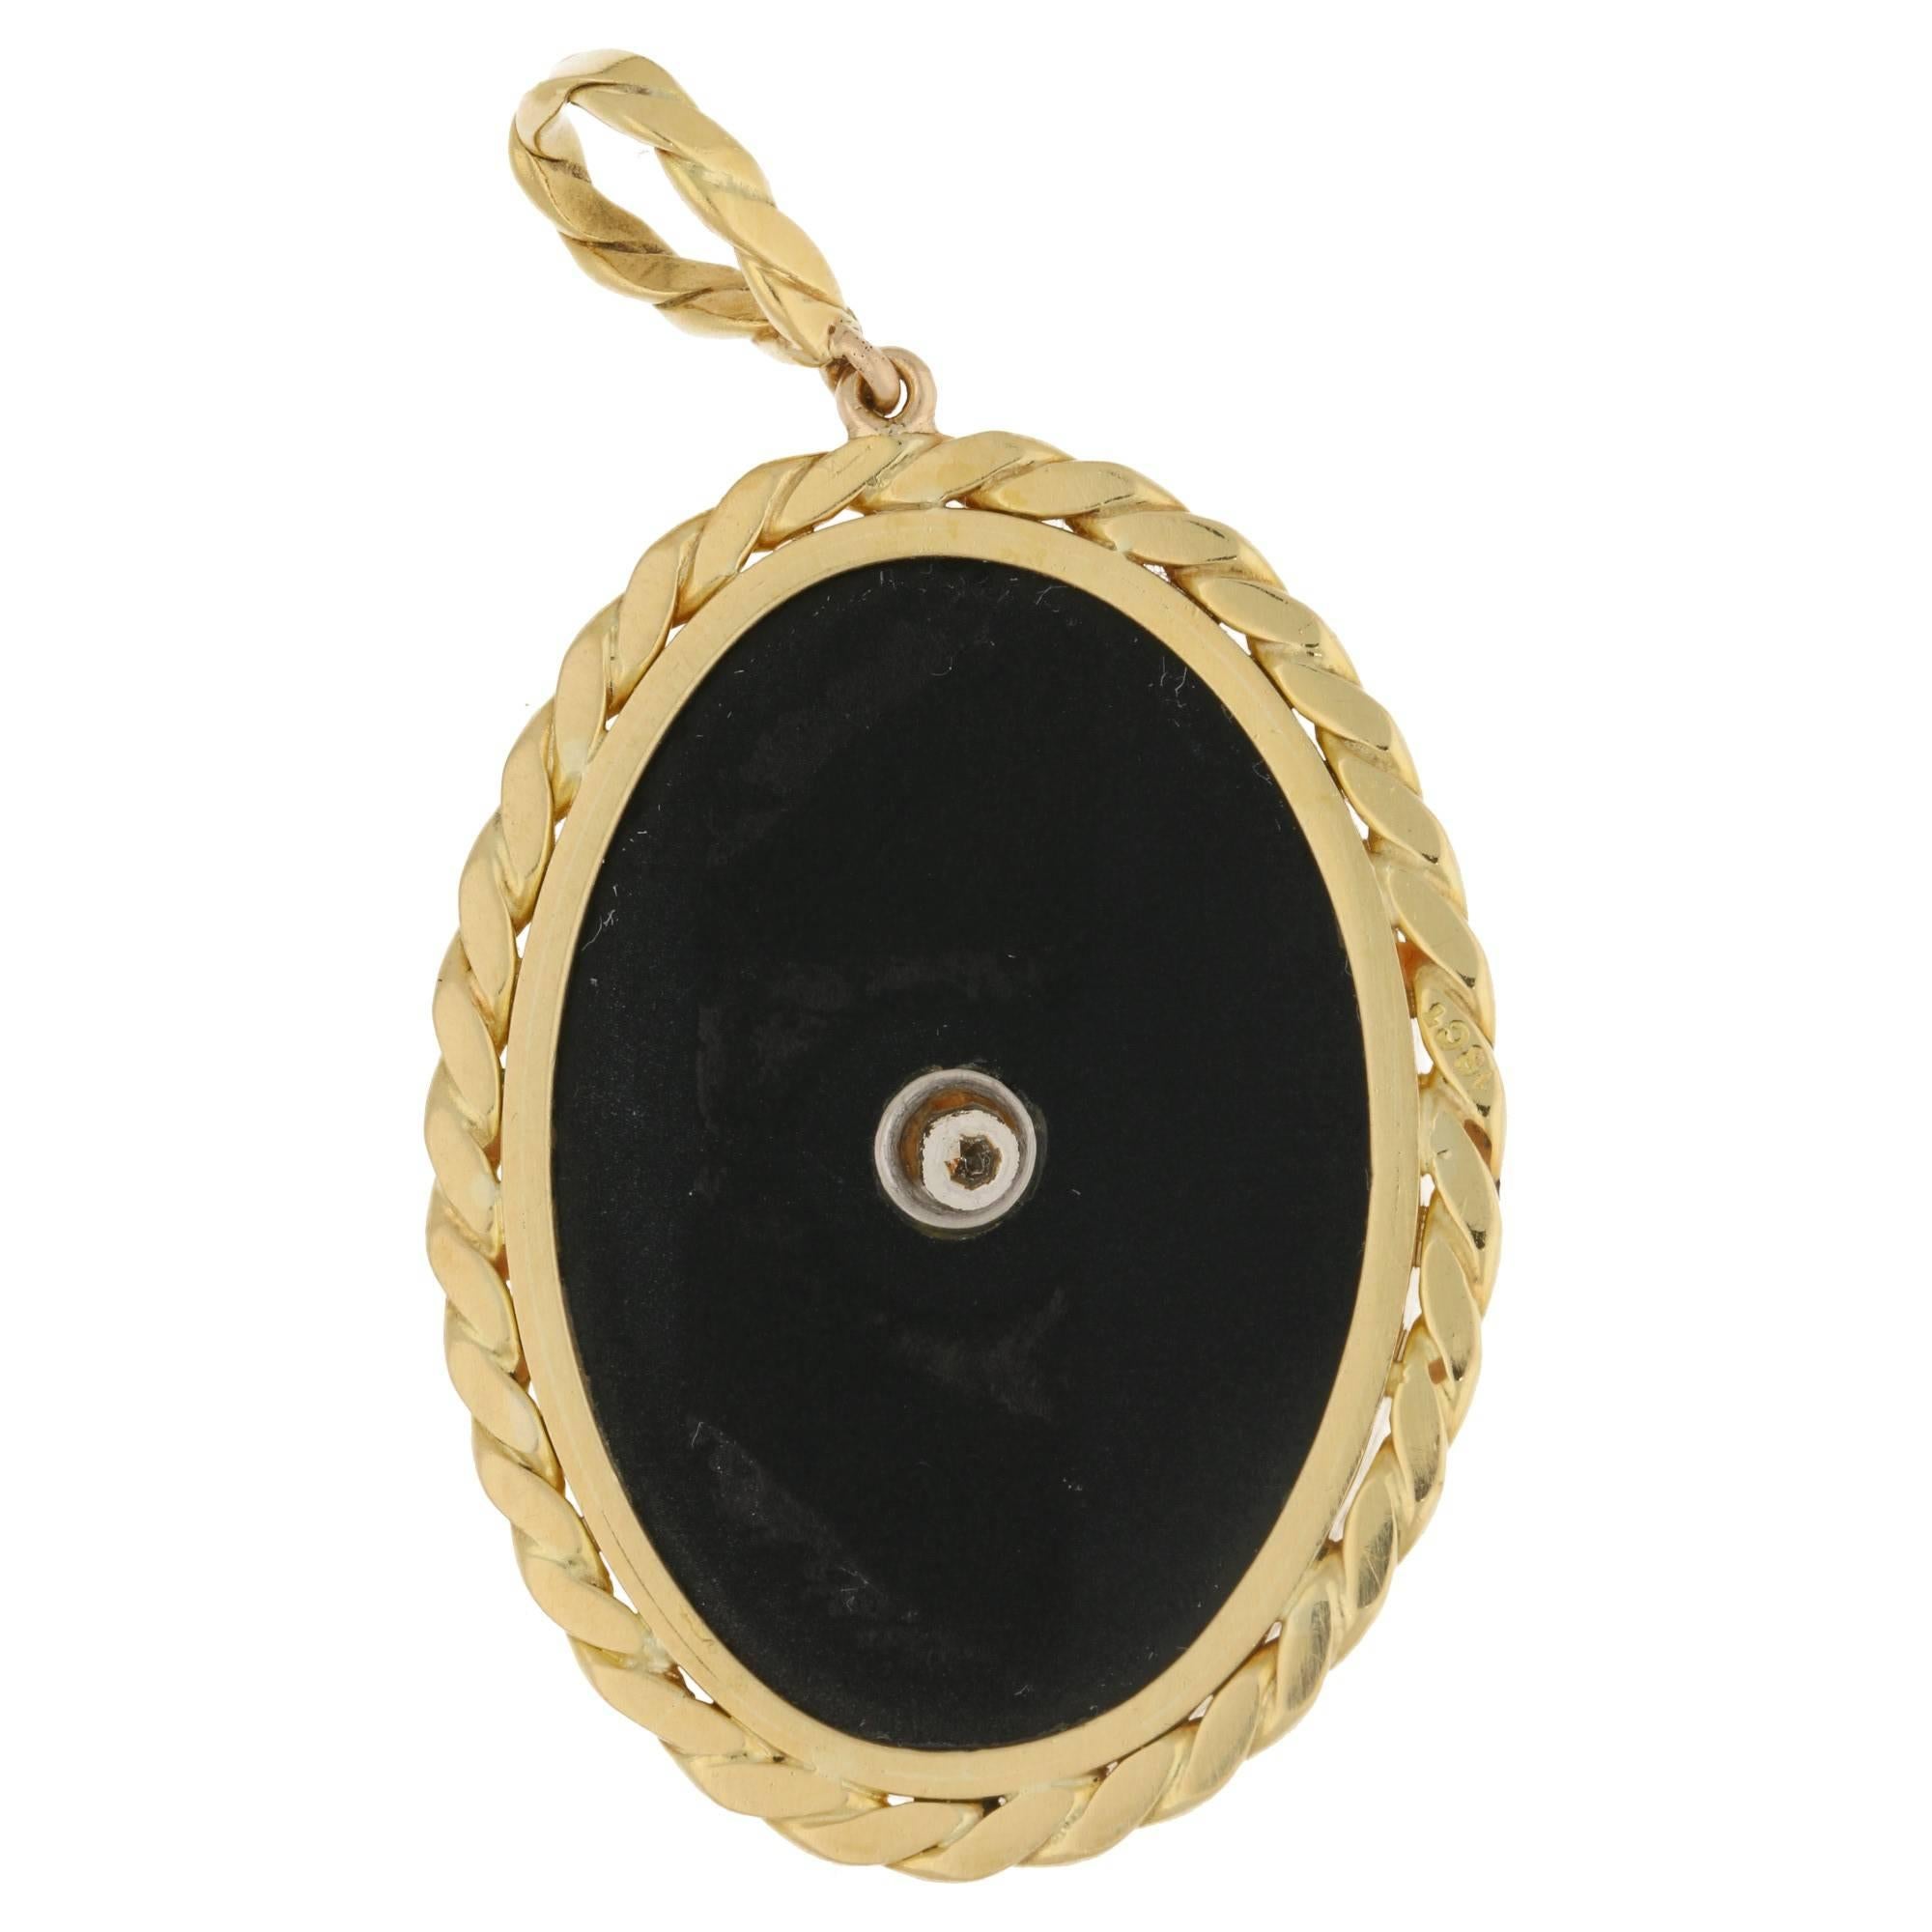 An onyx and diamond set pendant in 18ct yellow gold. With a round brilliant cut diamond centrally set in an 18ct white gold collet in an oval onyx panel encased in a border of 18ct yellow gold closed curb linkwork. Estimated diamond weight: 0.70cts.